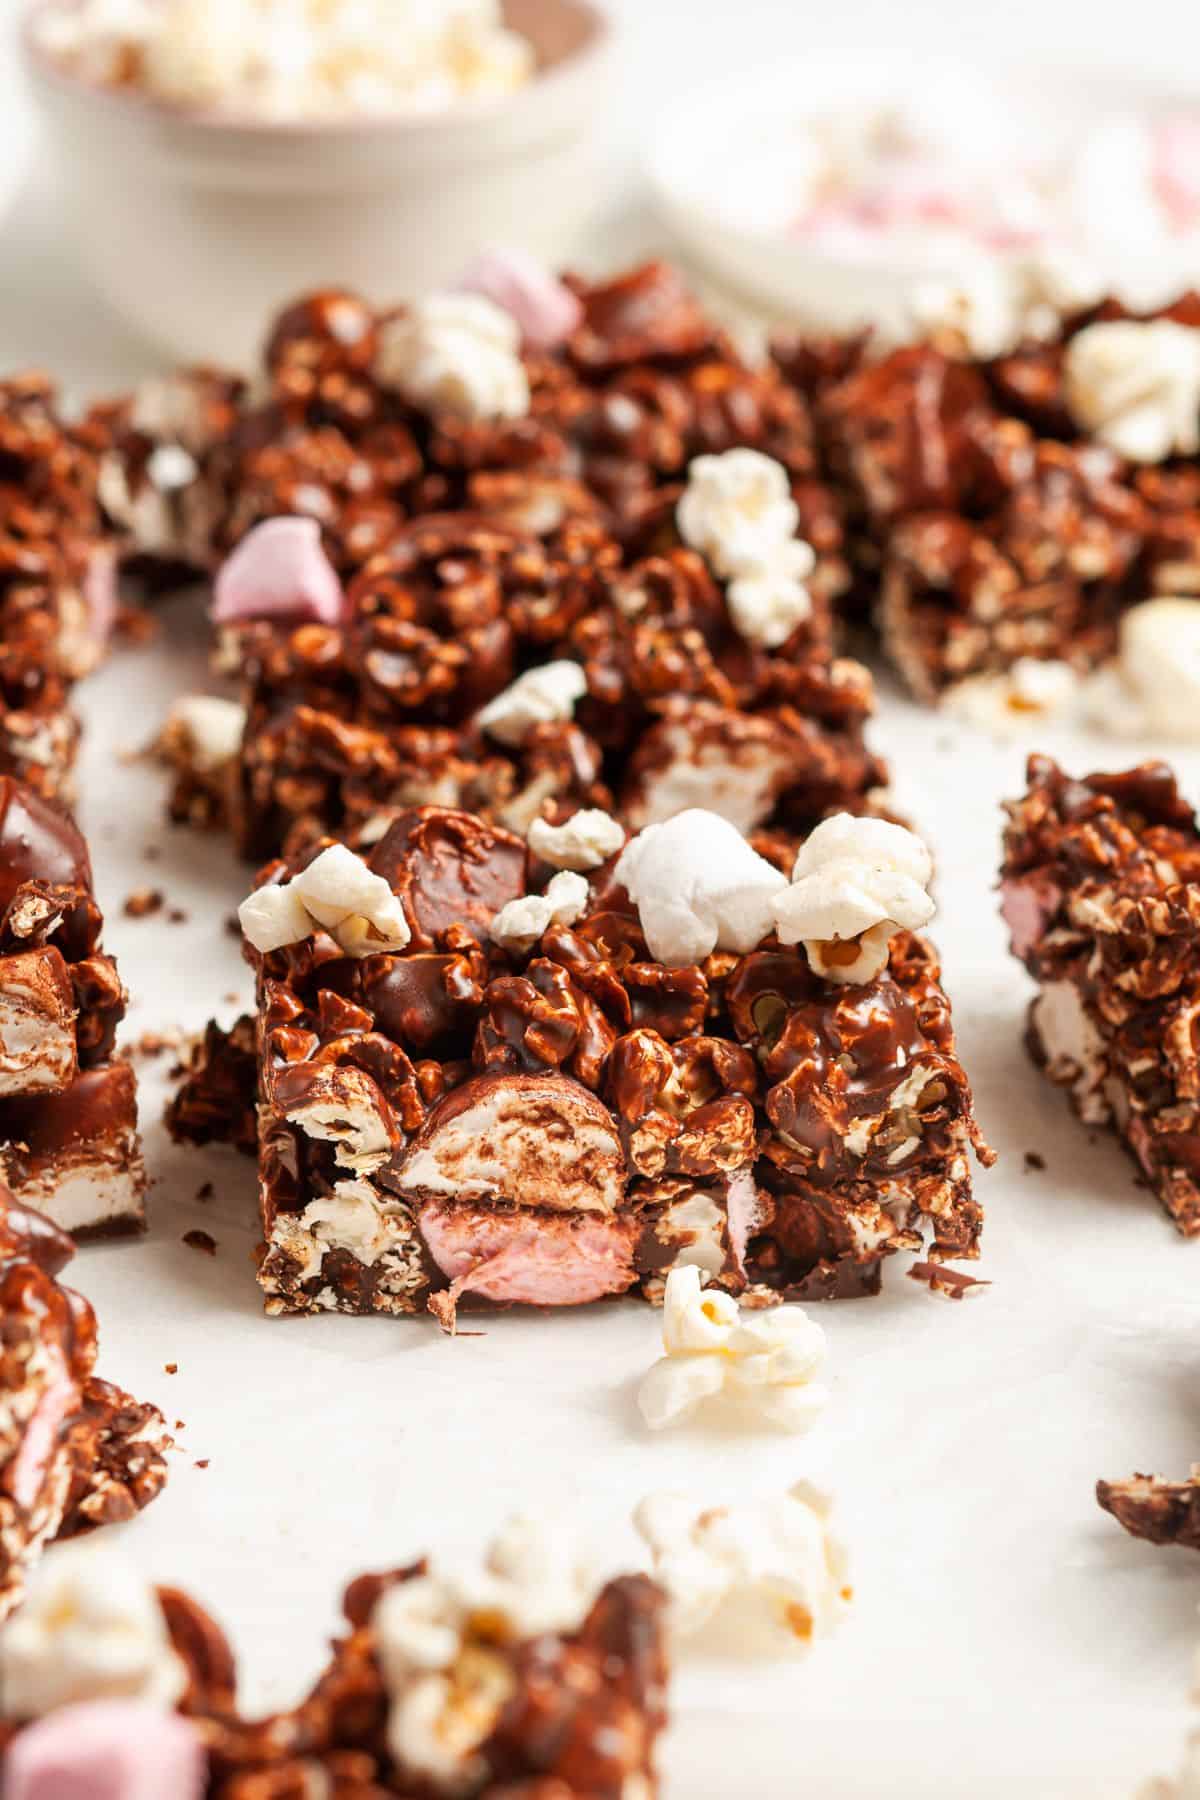 Shot of popcorn bars to show the filling of marshmallows and chocolate.